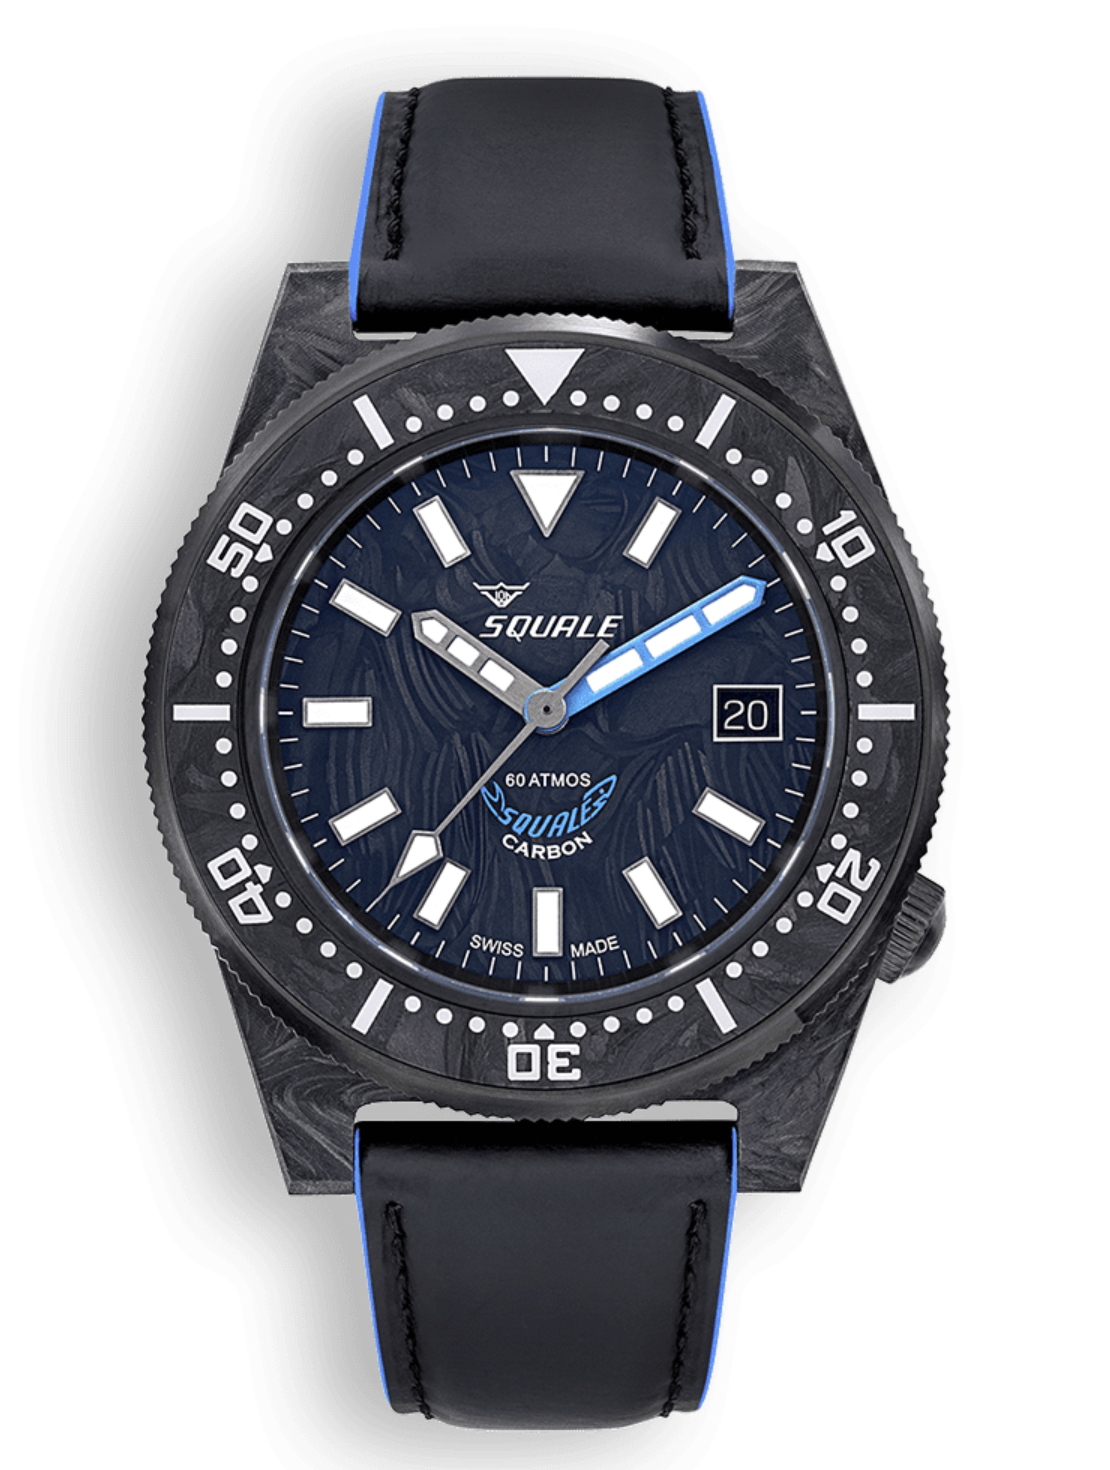 SQUALE T-183 FORGED CARBON BLUE